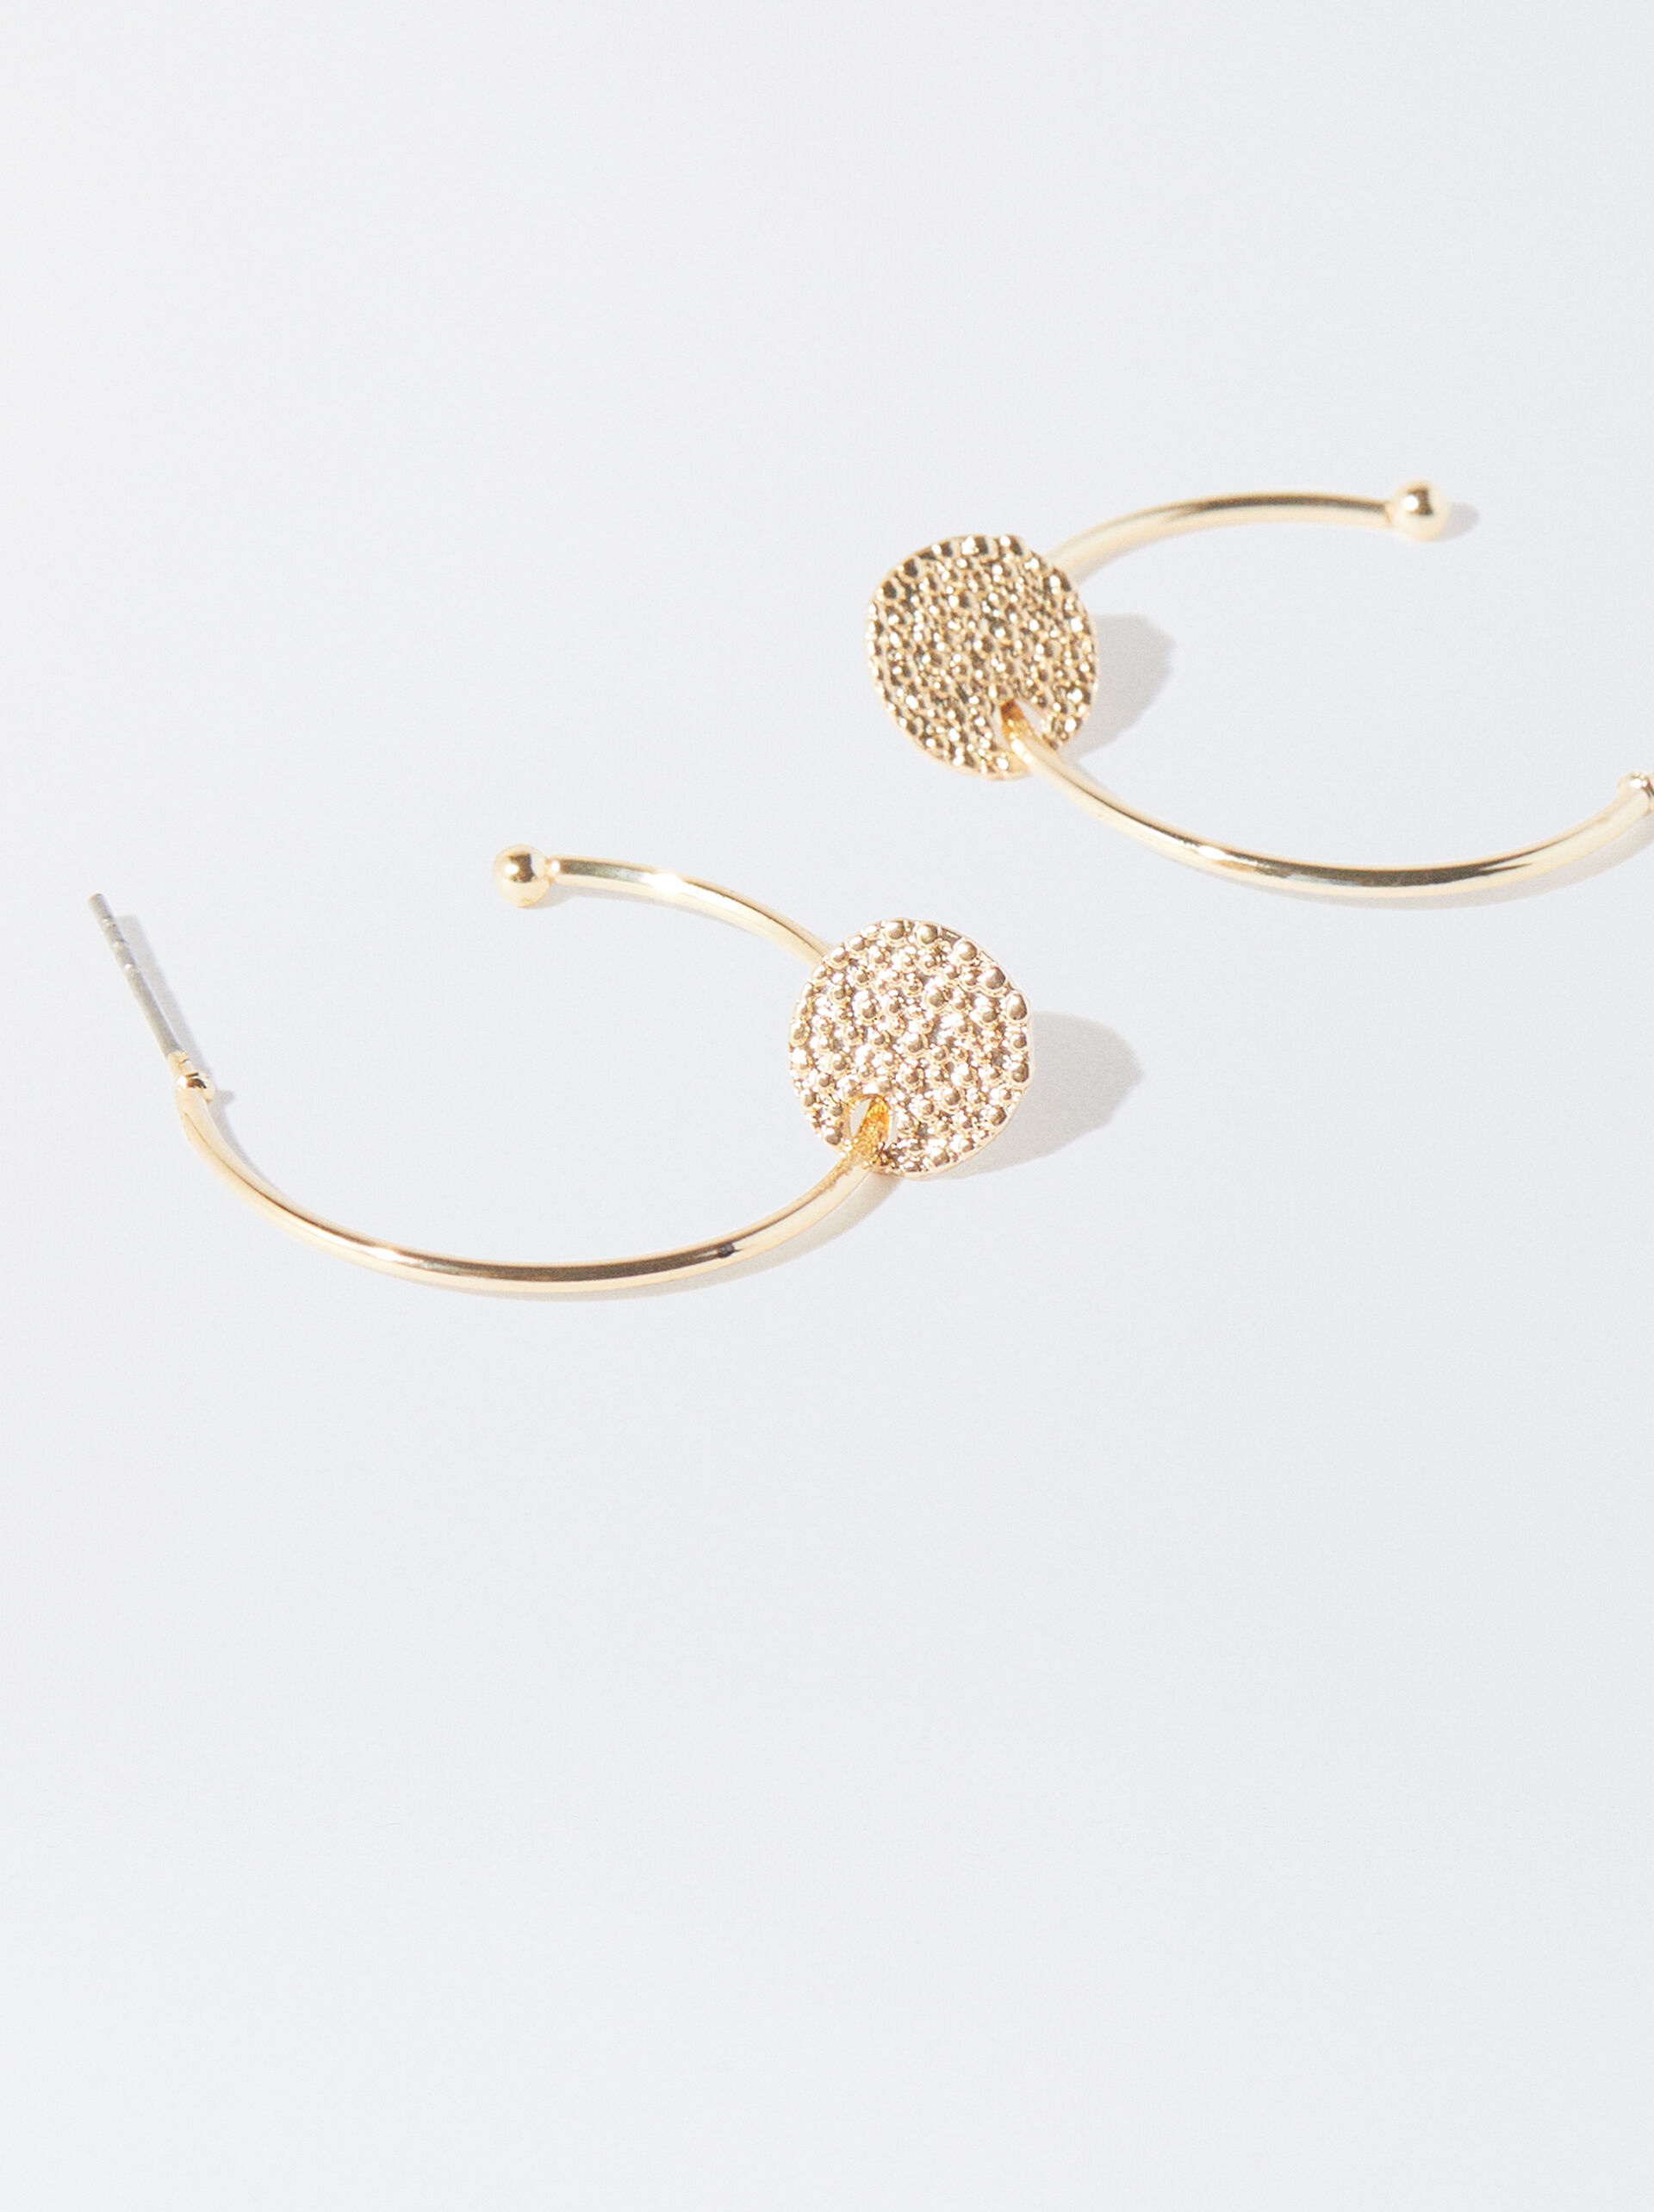 Gold-Toned Hoop Earrings With Medallions image number 2.0